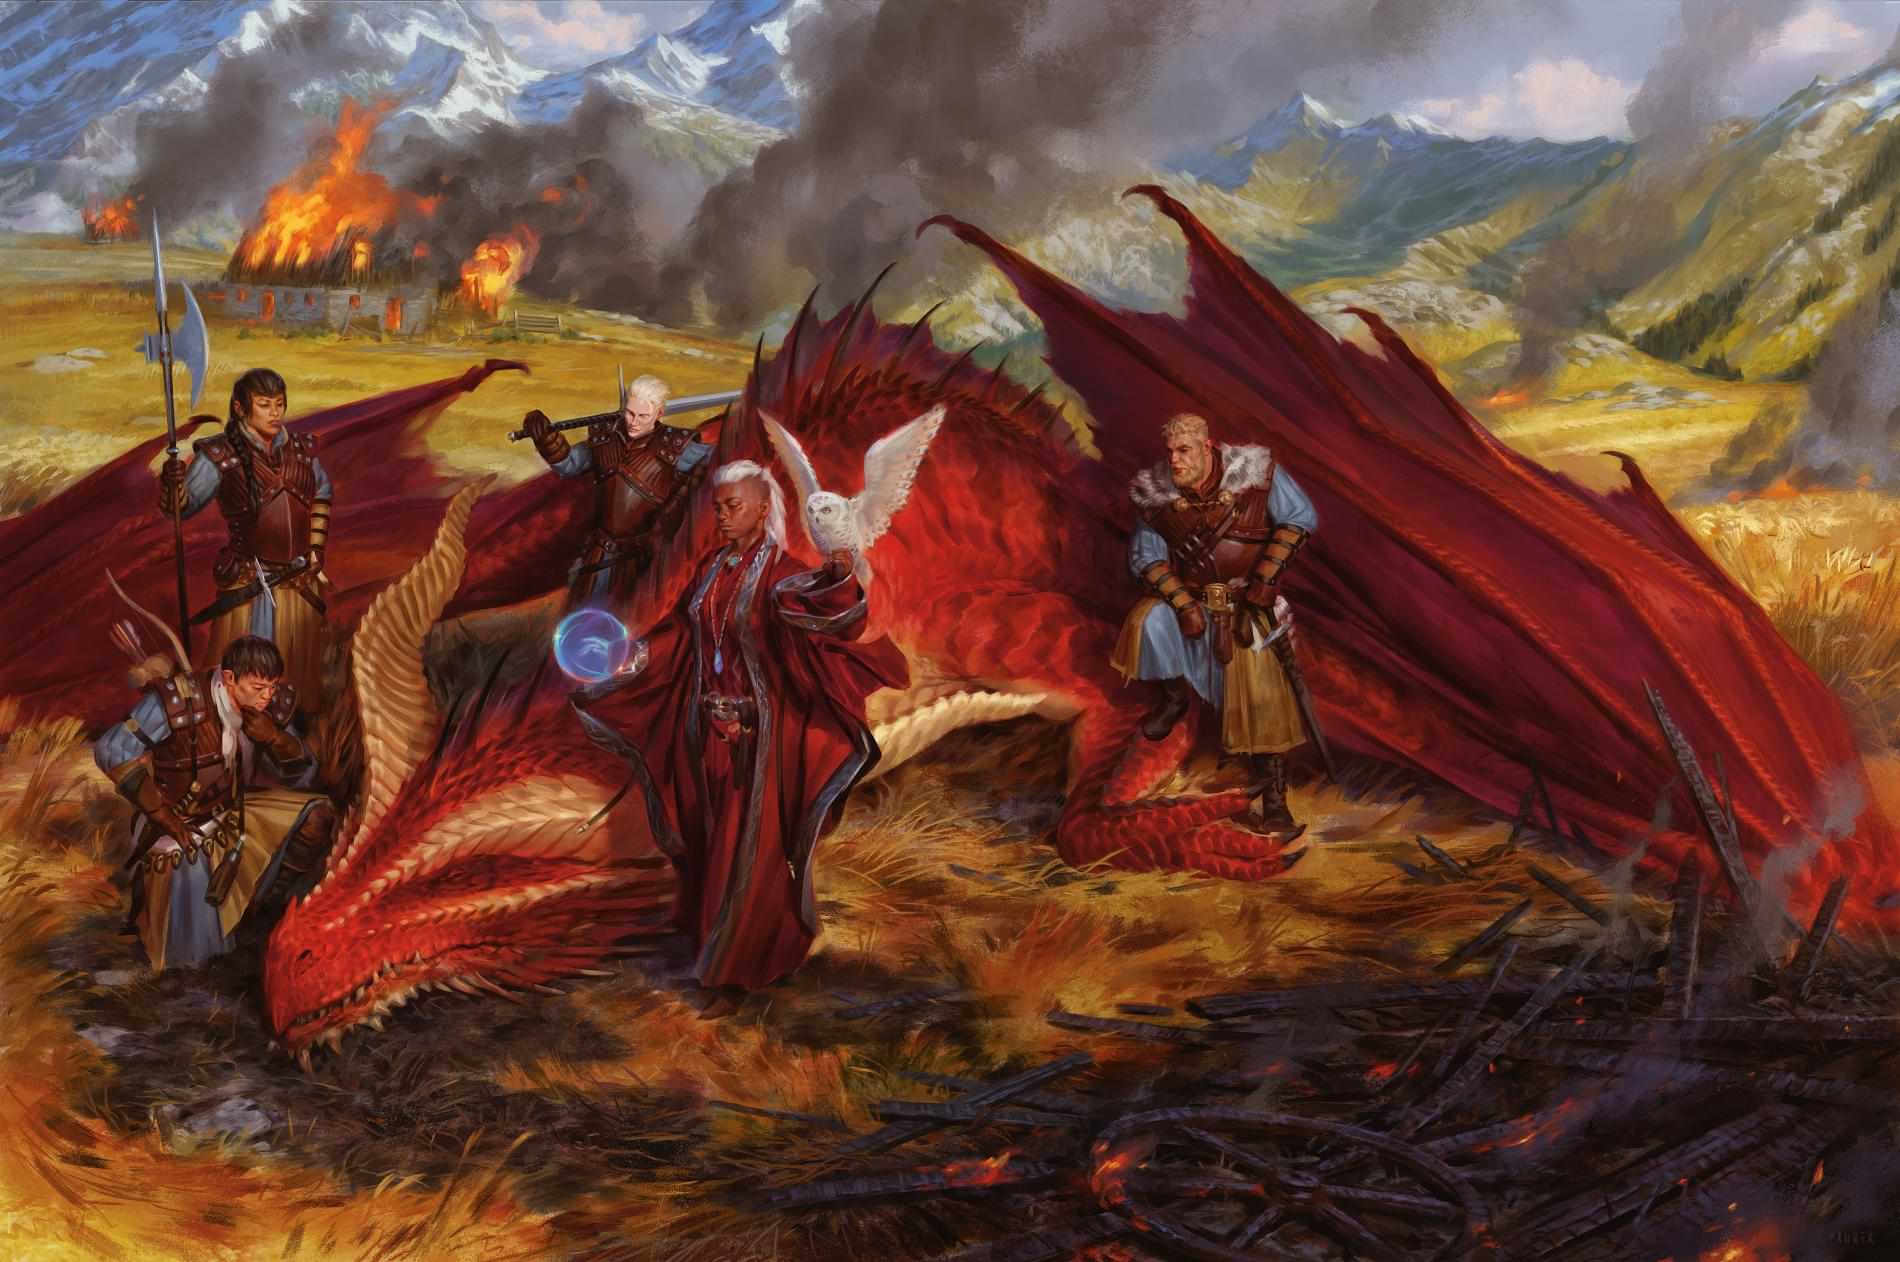 Adventurers stand surround a dead red dragon in a burned field